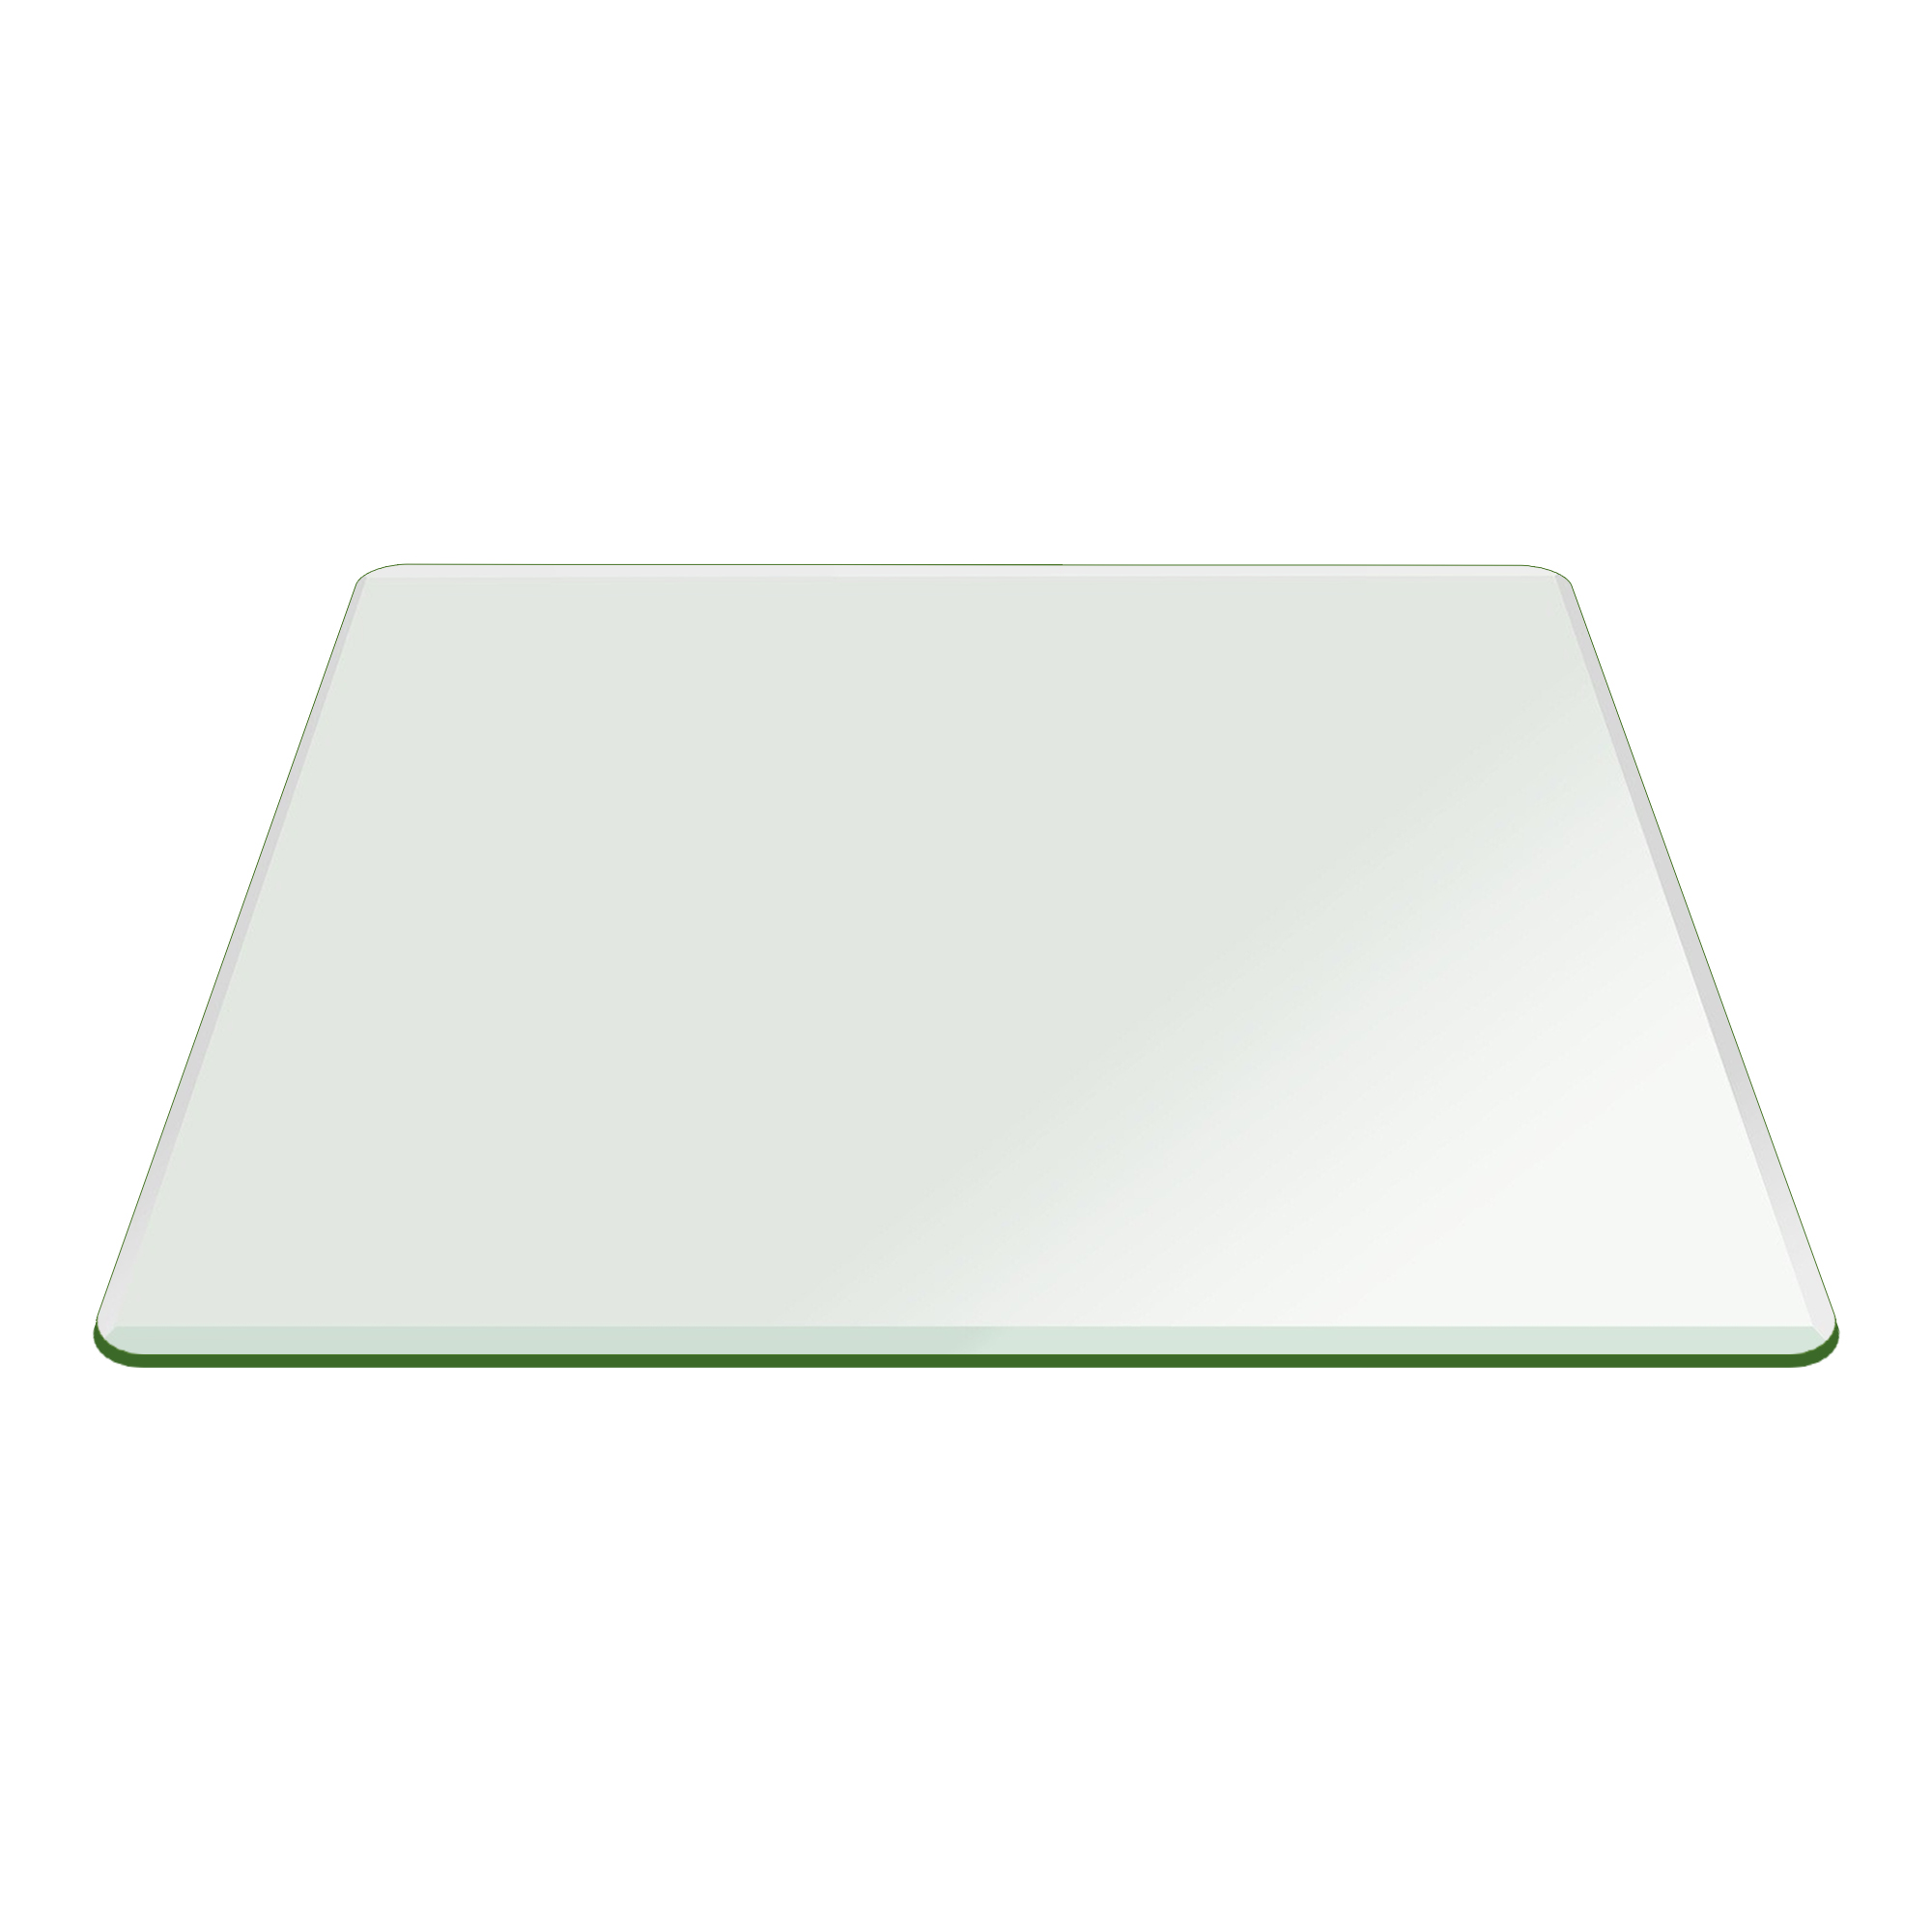 *SALE* 40CM ROUND FROSTED TEMPERED TOUGHENED GLASS 400MM TABLE TOP 8MM THICK UK 